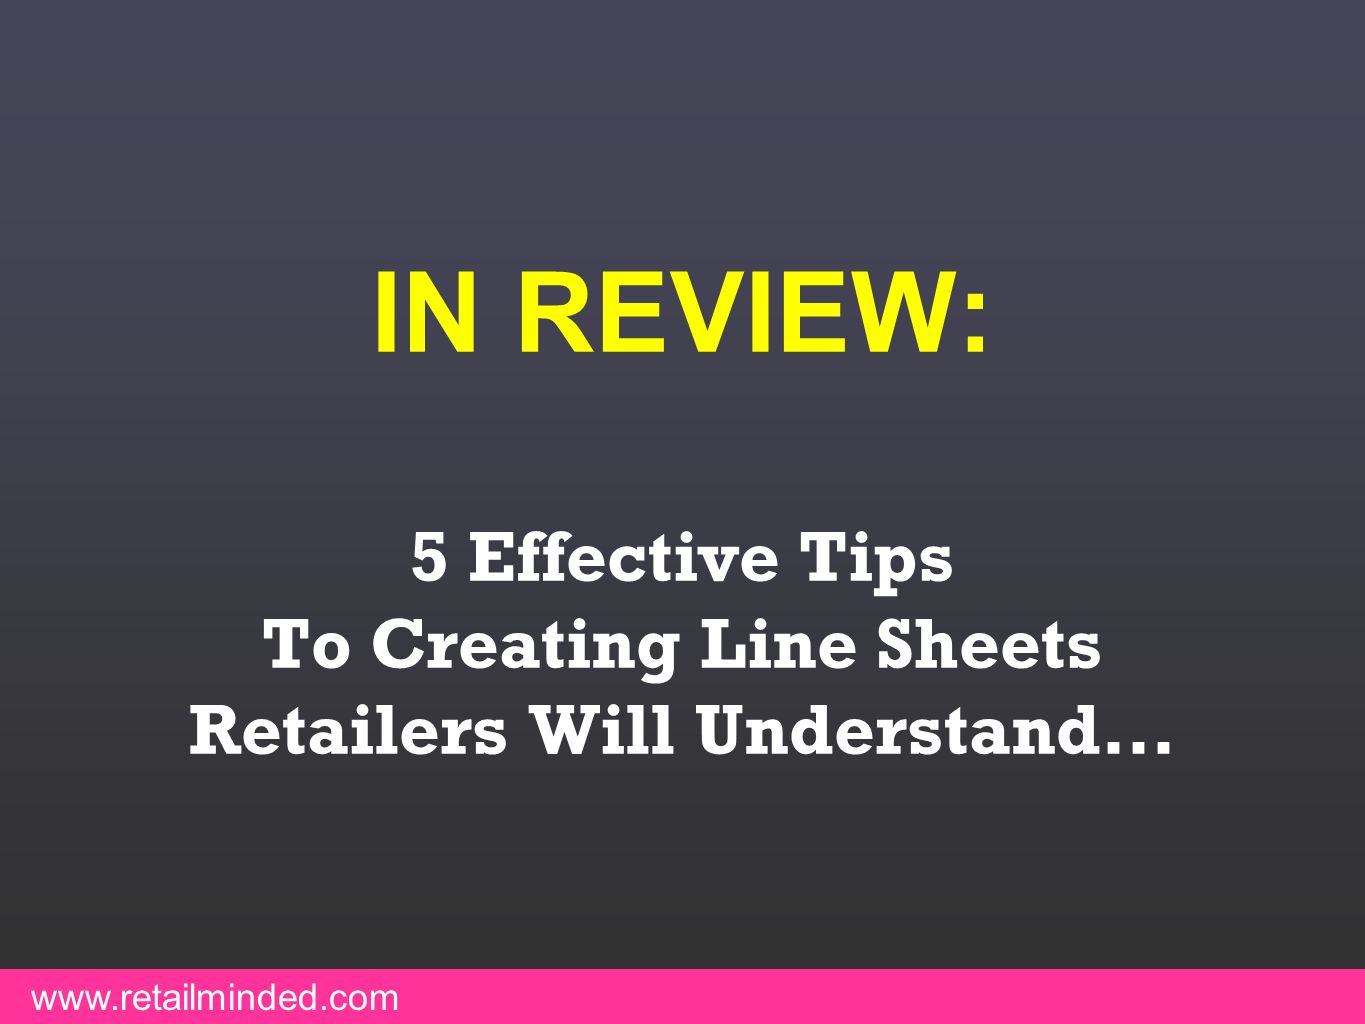 IN REVIEW: 5 Effective Tips To Creating Line Sheets Retailers Will Understand...